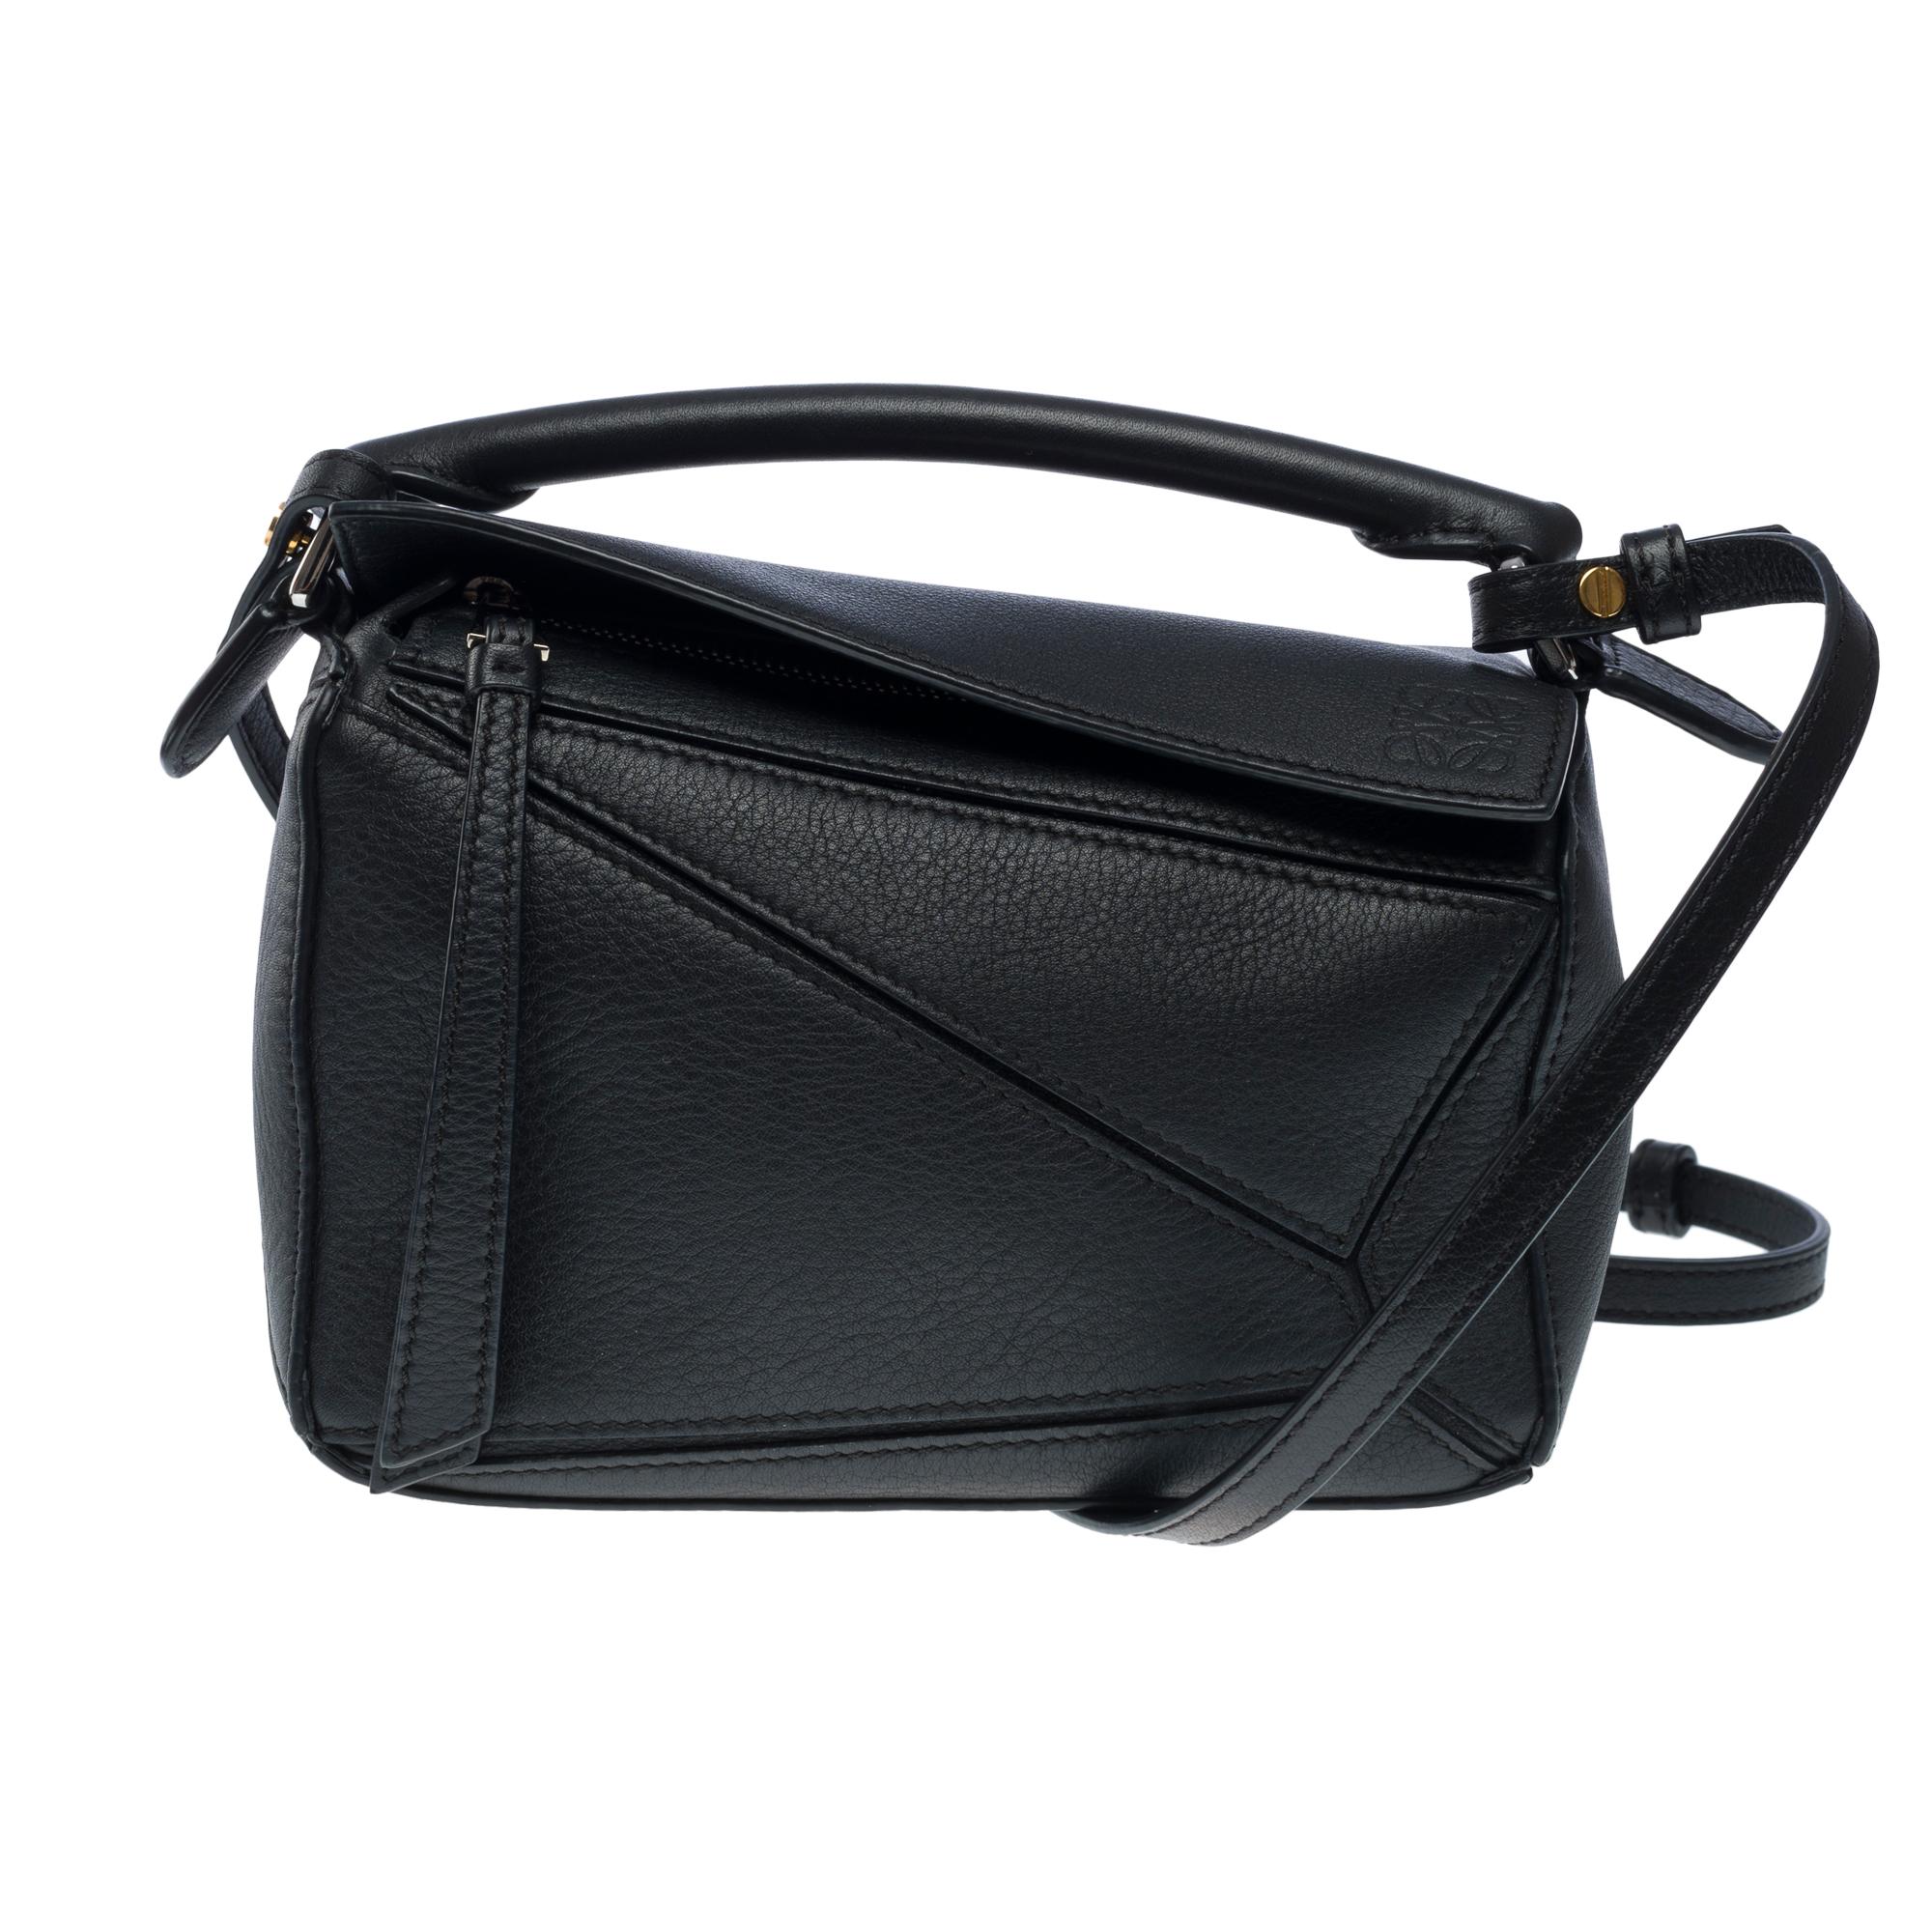 Very​ ​Chic​ ​Cuboid​ ​Loewe​ ​Puzzle​ ​Mini​ ​2​ ​WAY​ ​handbag​ ​in​ ​black​ ​leather​ ​designed​ ​by​ ​the​ ​artistic​ ​director​ ​of​ ​the​ ​brand​ ​Jonathan​ ​Anderson
Silver​ ​metal​ ​trim,​ ​simple​ ​black​ ​leather​ ​handle,​ ​removable​